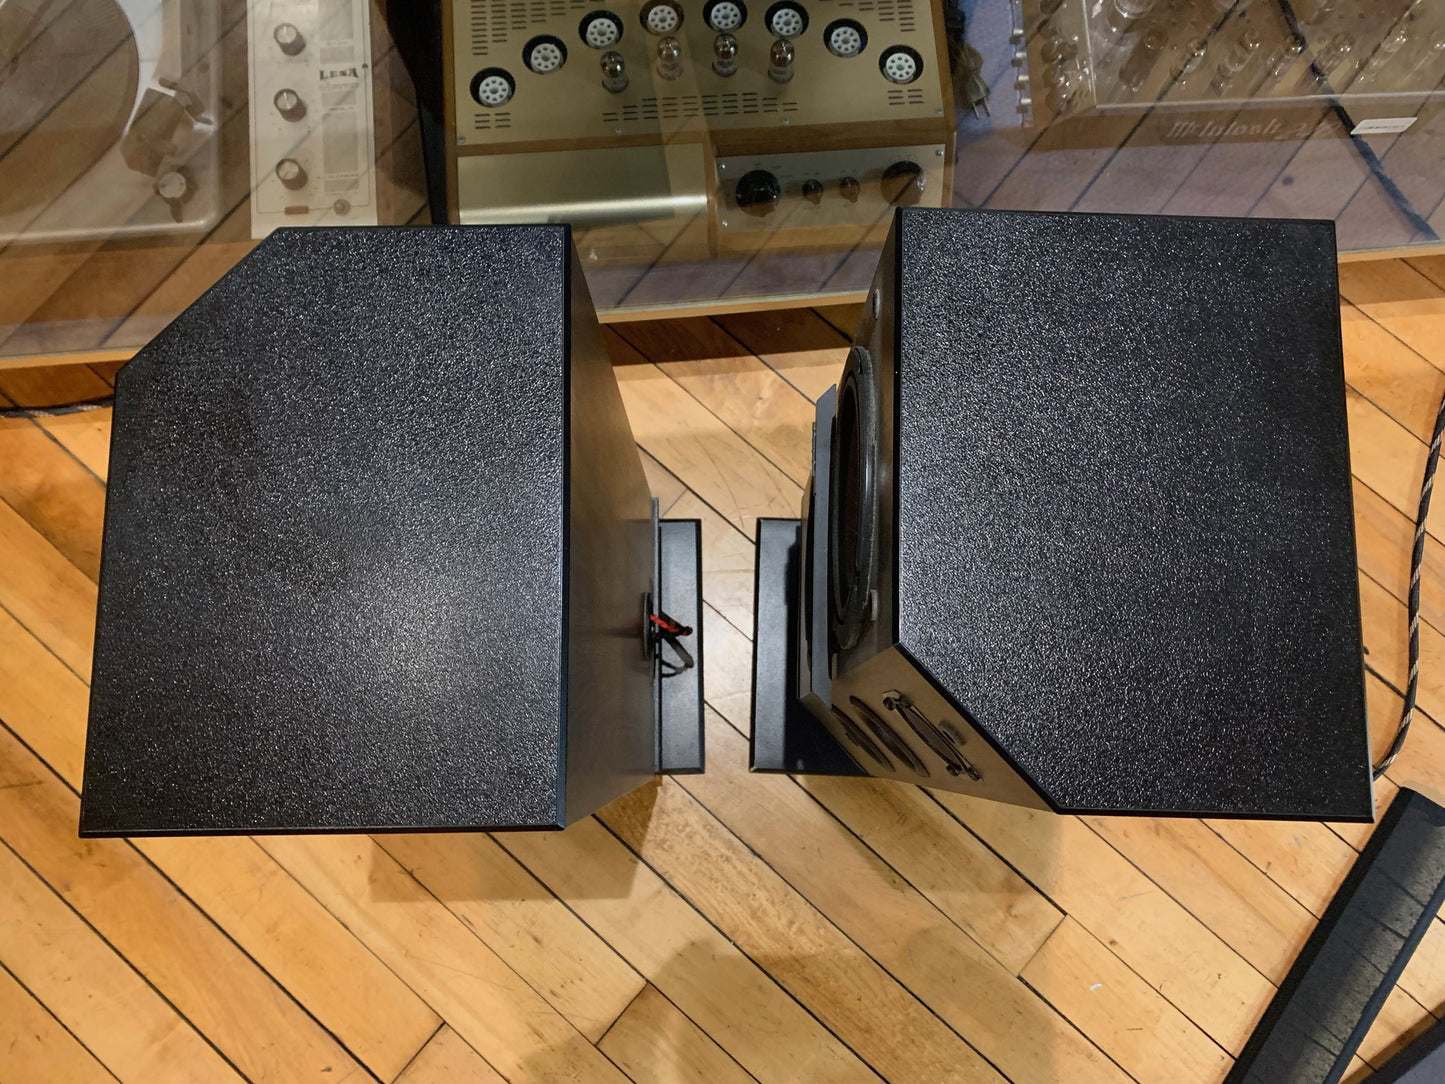 Bose 4001 Stereo Speakers & Stands